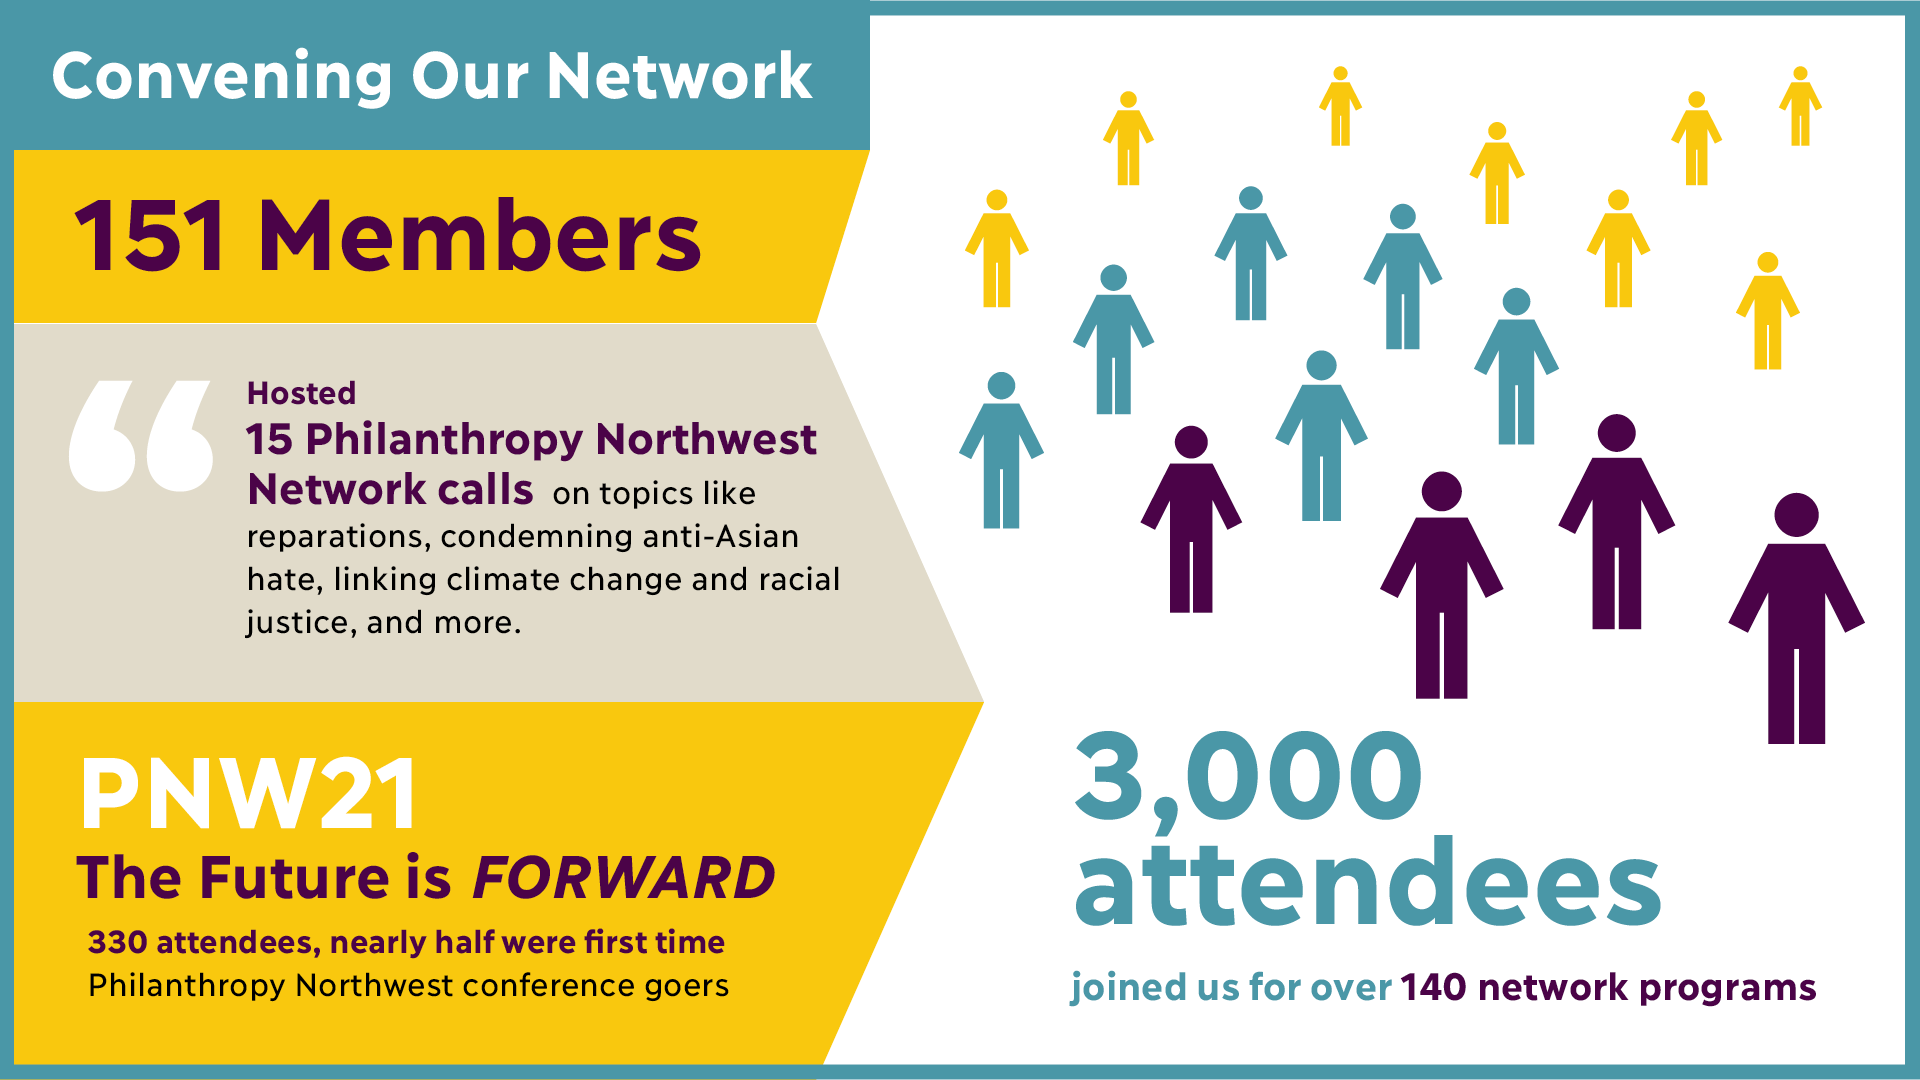 2021 Annual Report Slide on Convening Our Network. Had 151 members, hosted 15 network calls, had 330 attendees at our conference and 3,000 attendees joined us for 140 network programs.